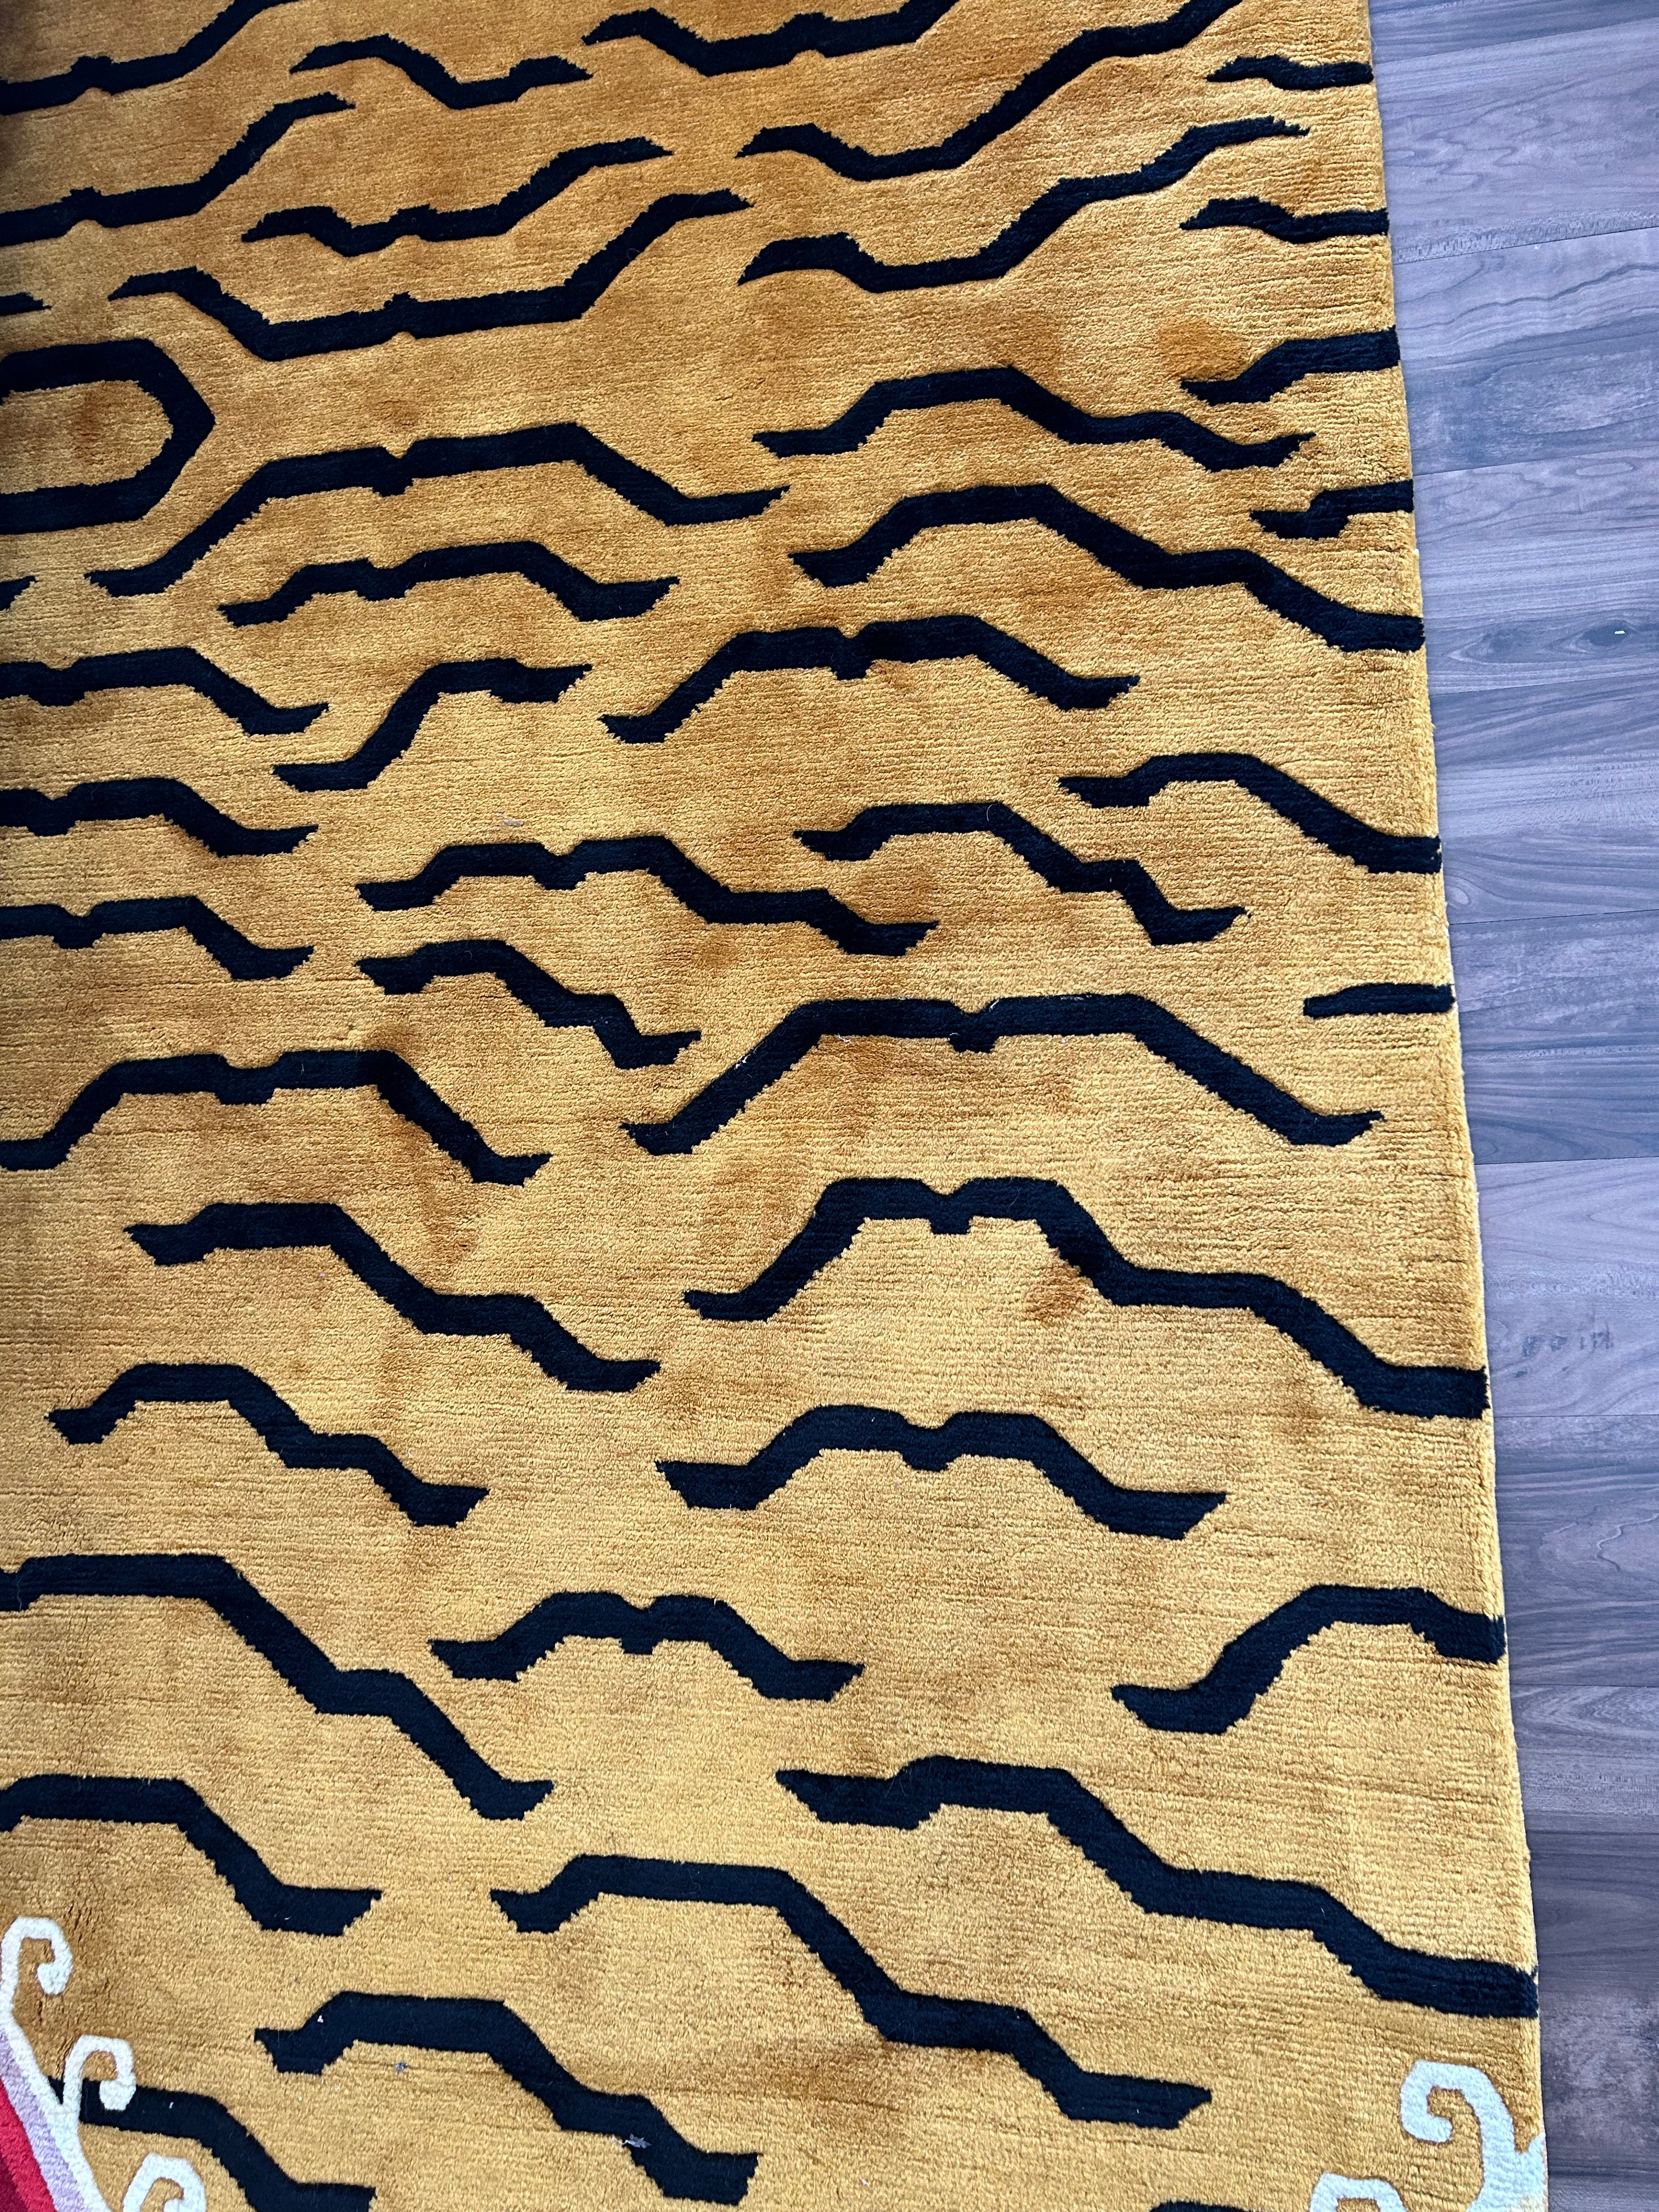 Handwoven Tibetan wool rug with a colorful mountain scene on either end of the rug with a semi flowing-geometric tiger inspired design in the middle.